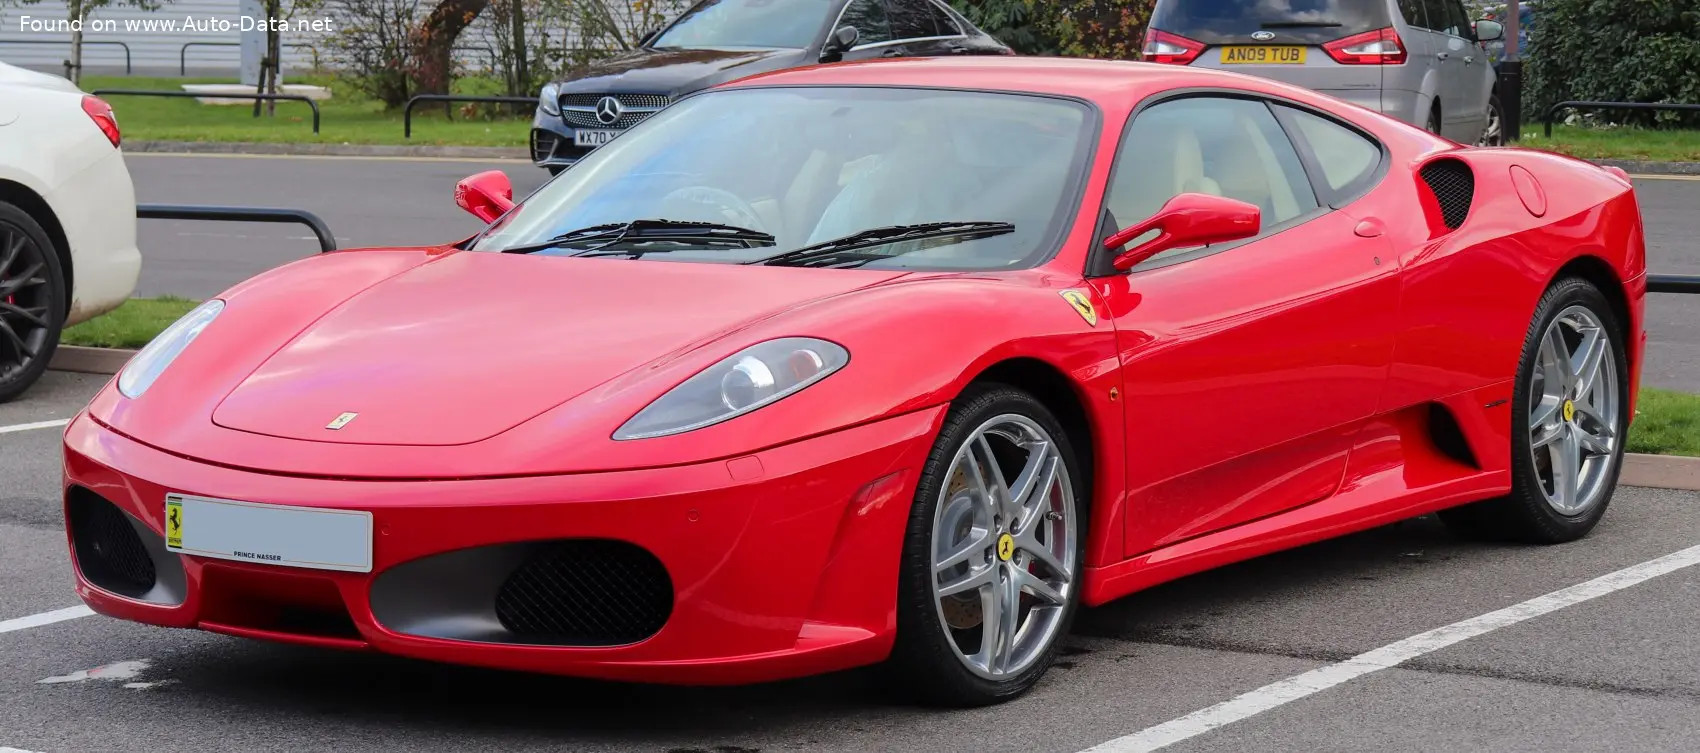 ferrari f430 specs - What is the F430 0 to 100